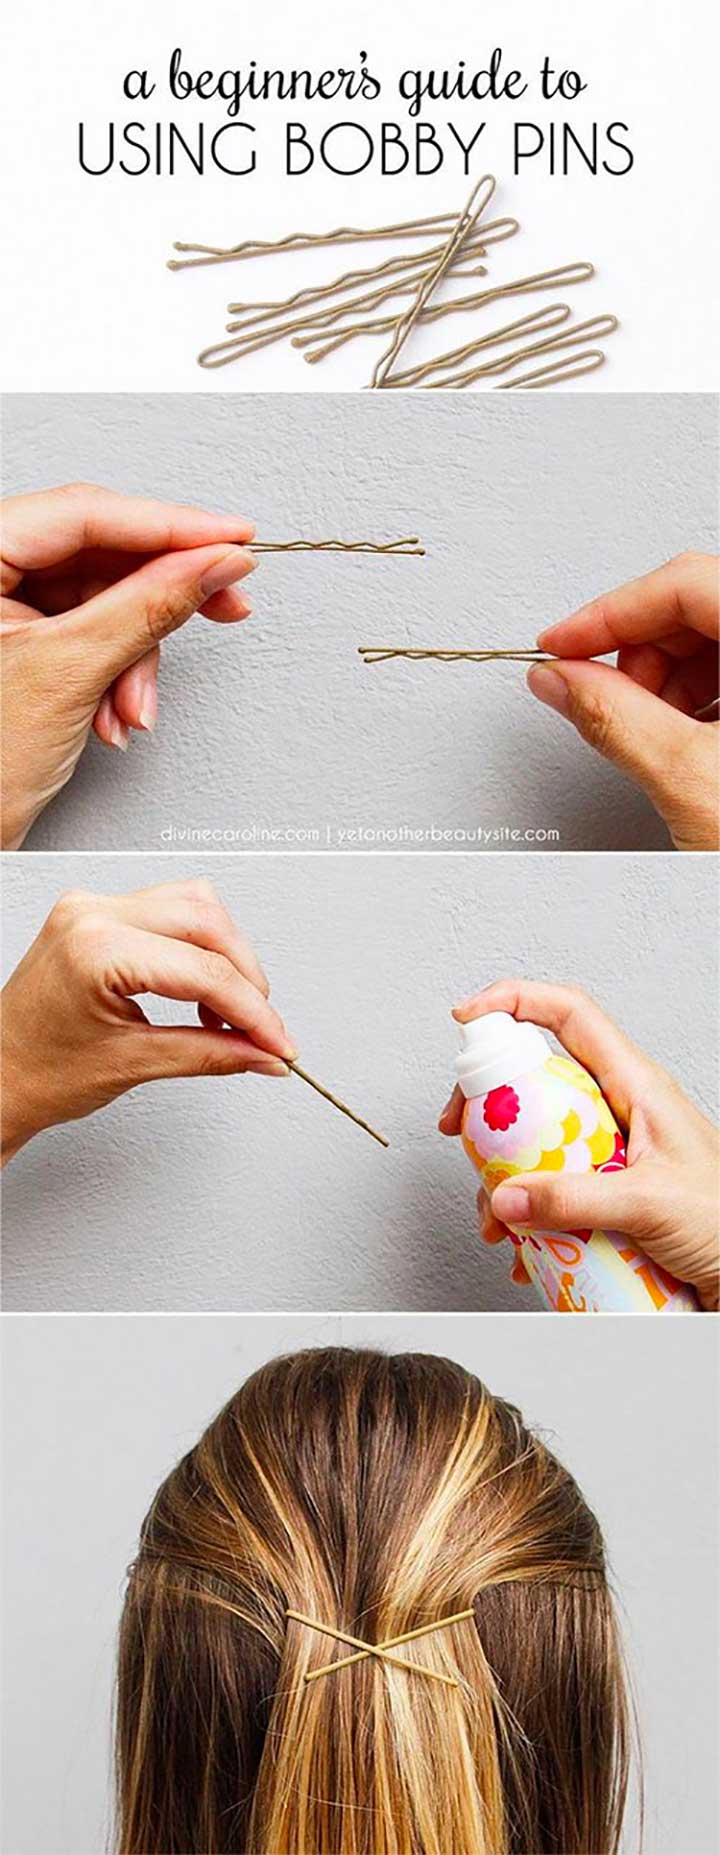 A Beginners Guide To Using Bobby Pins